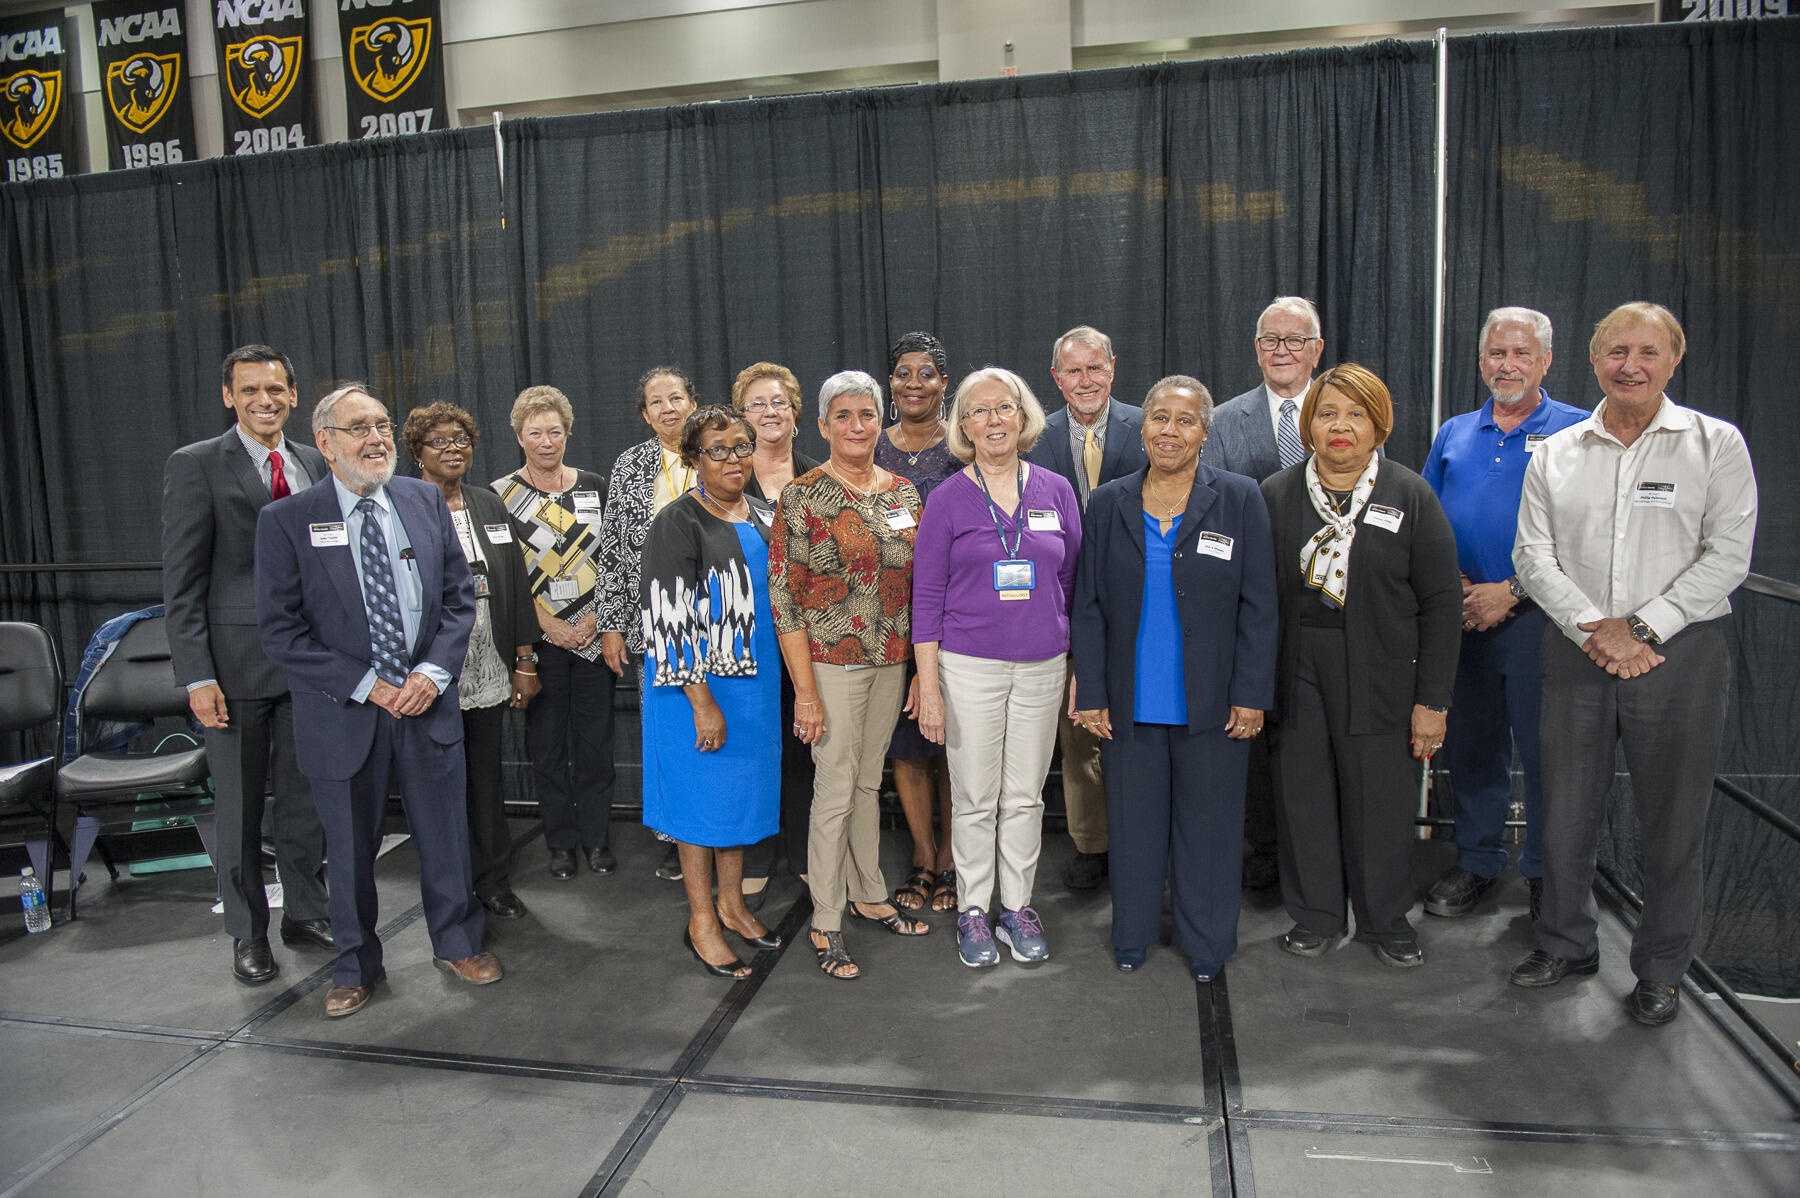 Dr. Rao, far left, poses for a photo with faculty and staff celebrating 45 years of service at VCU.